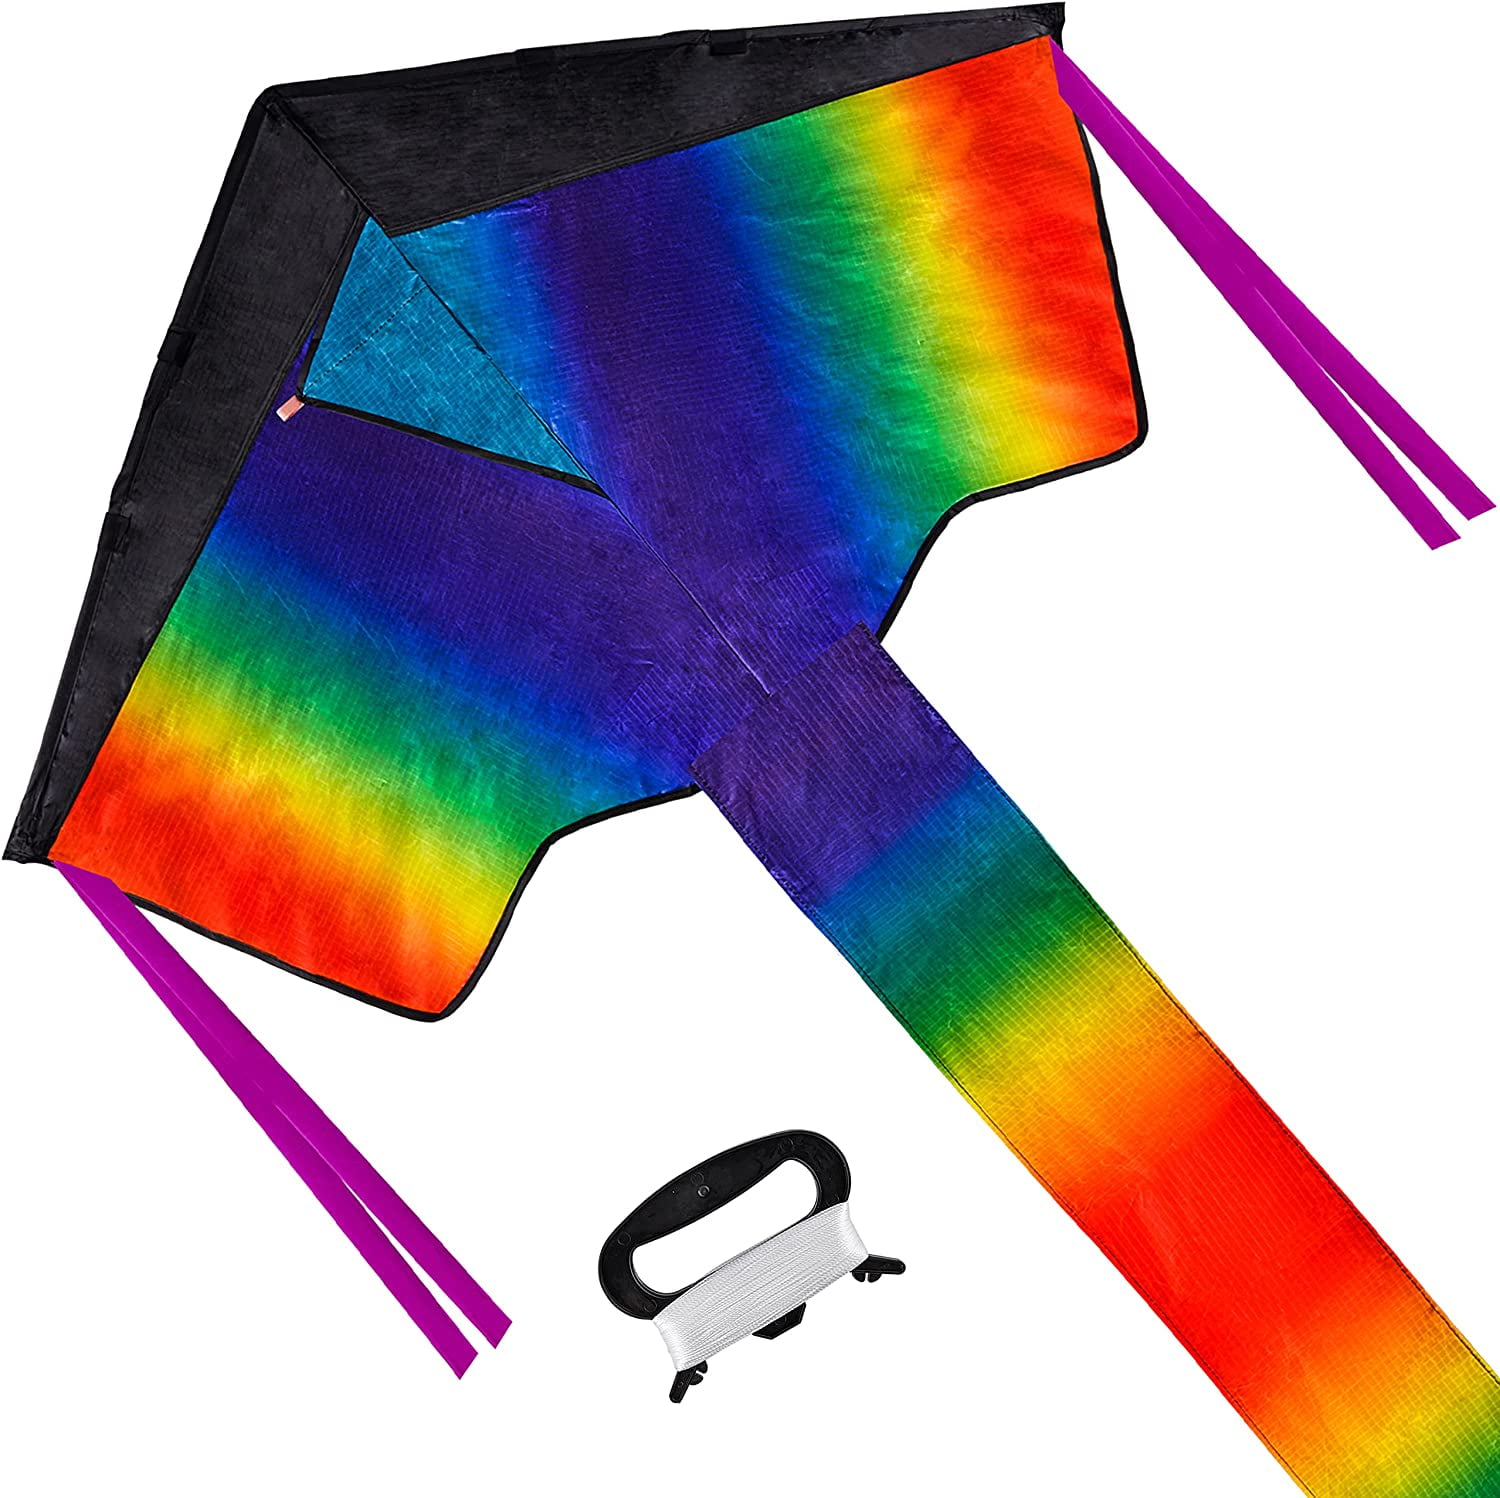 IMPRESA Kites Rainbow Delta Kite HUGE Easy to Assemble Launch Kid Play Relax for sale online 